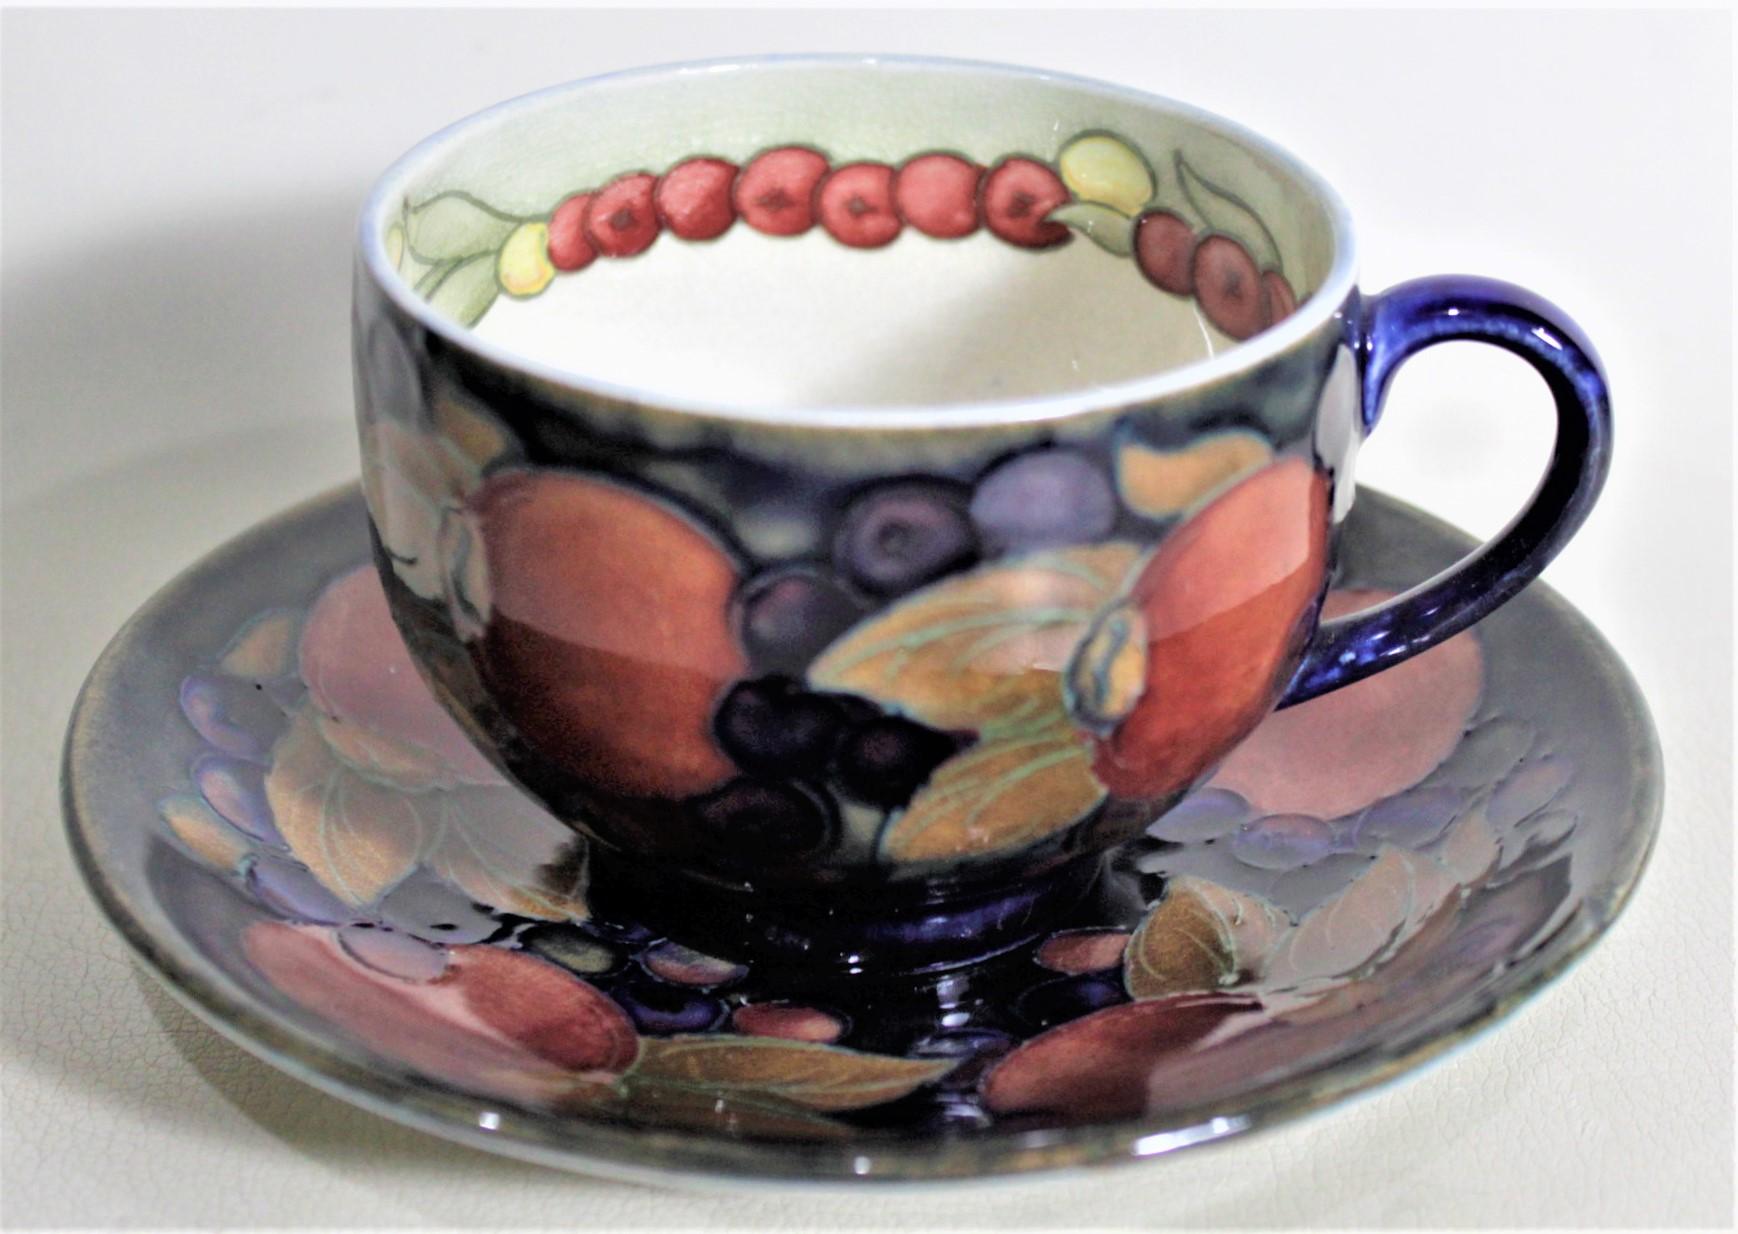 This art pottery teacup and saucer set was done by the Moorcroft Pottery company of England in circa 1925 in their 'Pomegranate' pattern. Each duo is done in the Moorcroft signature deep cobalt blue ground with a series of fruits around the outer